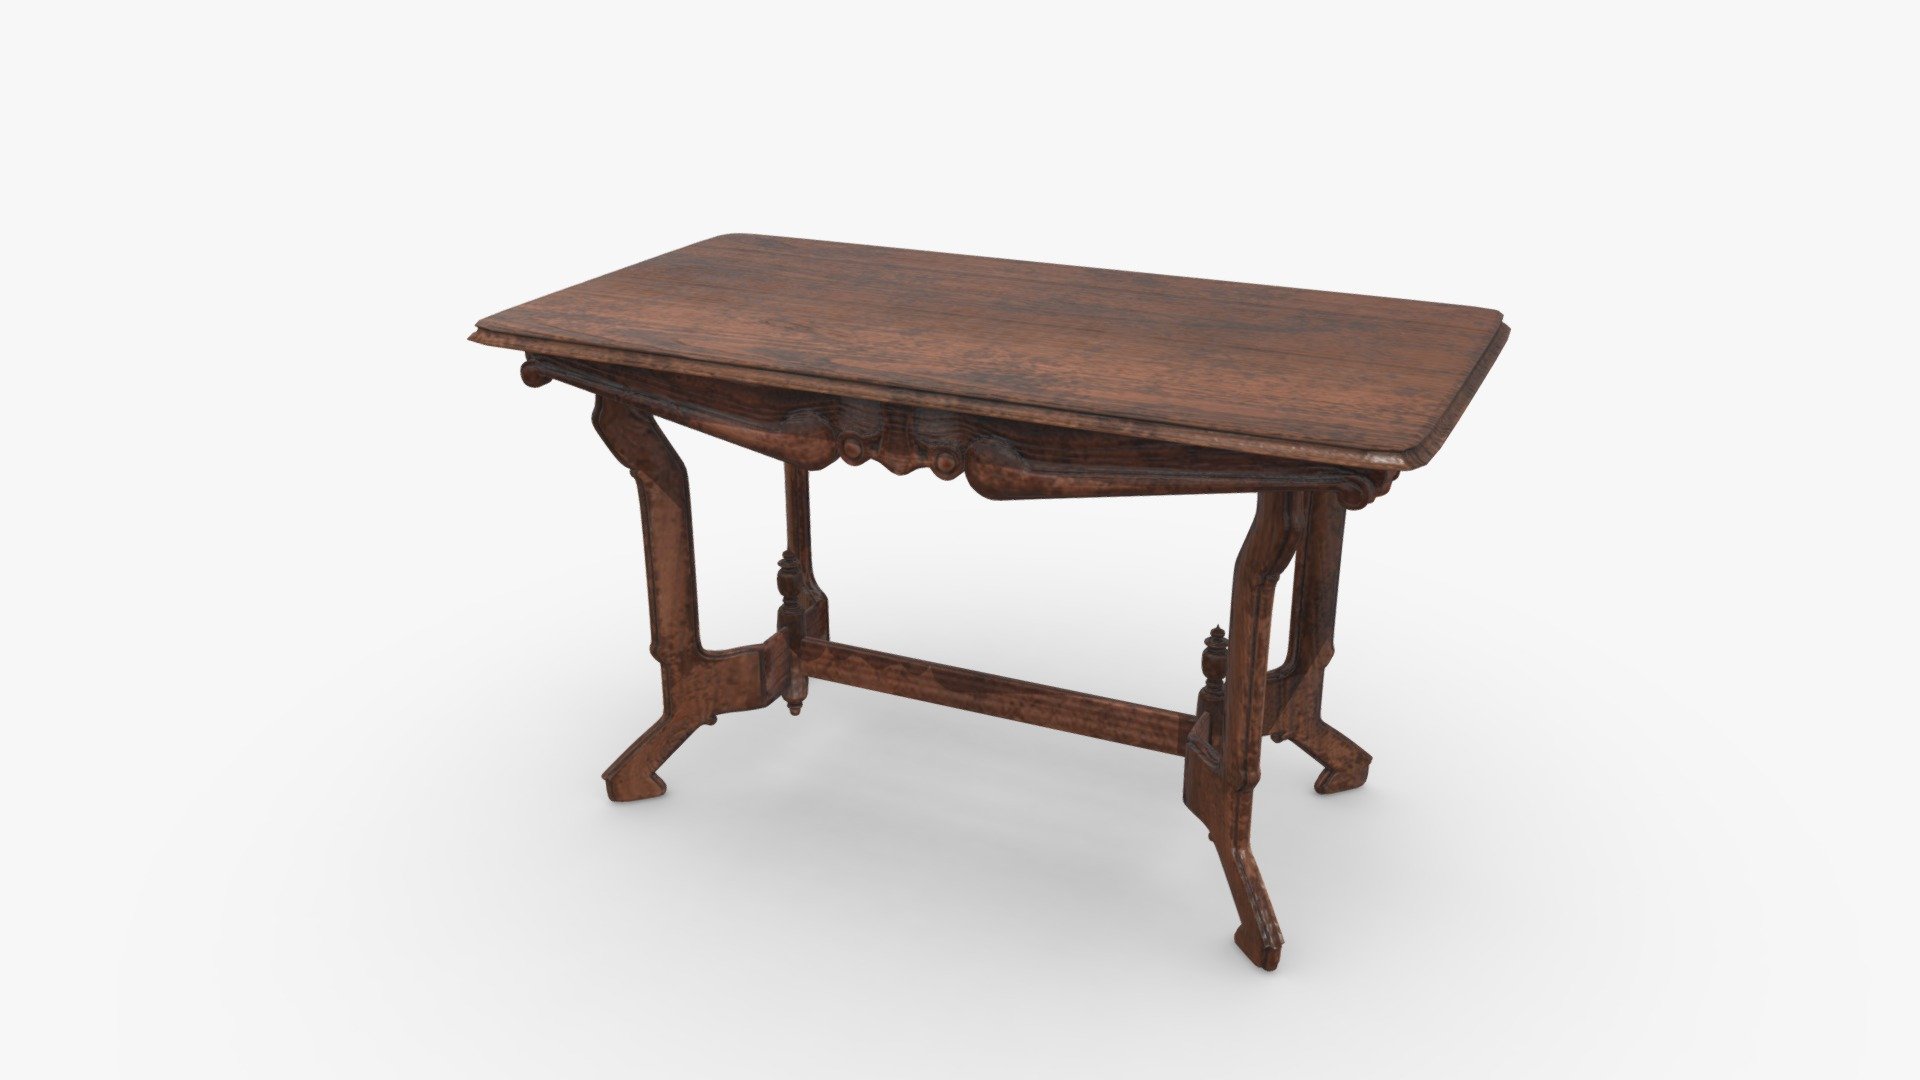 Check out my website for more products and better deals! &amp;gt;&amp;gt; SM5 by Heledahn &amp;lt;&amp;lt;

This is a digital 3D model of a Carved Victorian Style Table. The table has a dramatic design, that can be used for any Medieval/Fantasy themed render projects, used either as a table or as a desk. 

The Table has been textured with a number of different wood finishes and wear damages, ranging from simply old looking wood, to absolutely ruined and rotten.

  

The product includes a dowload link with 2K resolution textures for closeups.
This product will achieve realistic results in your rendering projects and animations, being greatly suited for close-ups due to their high quality topology and PBR shading 3d model